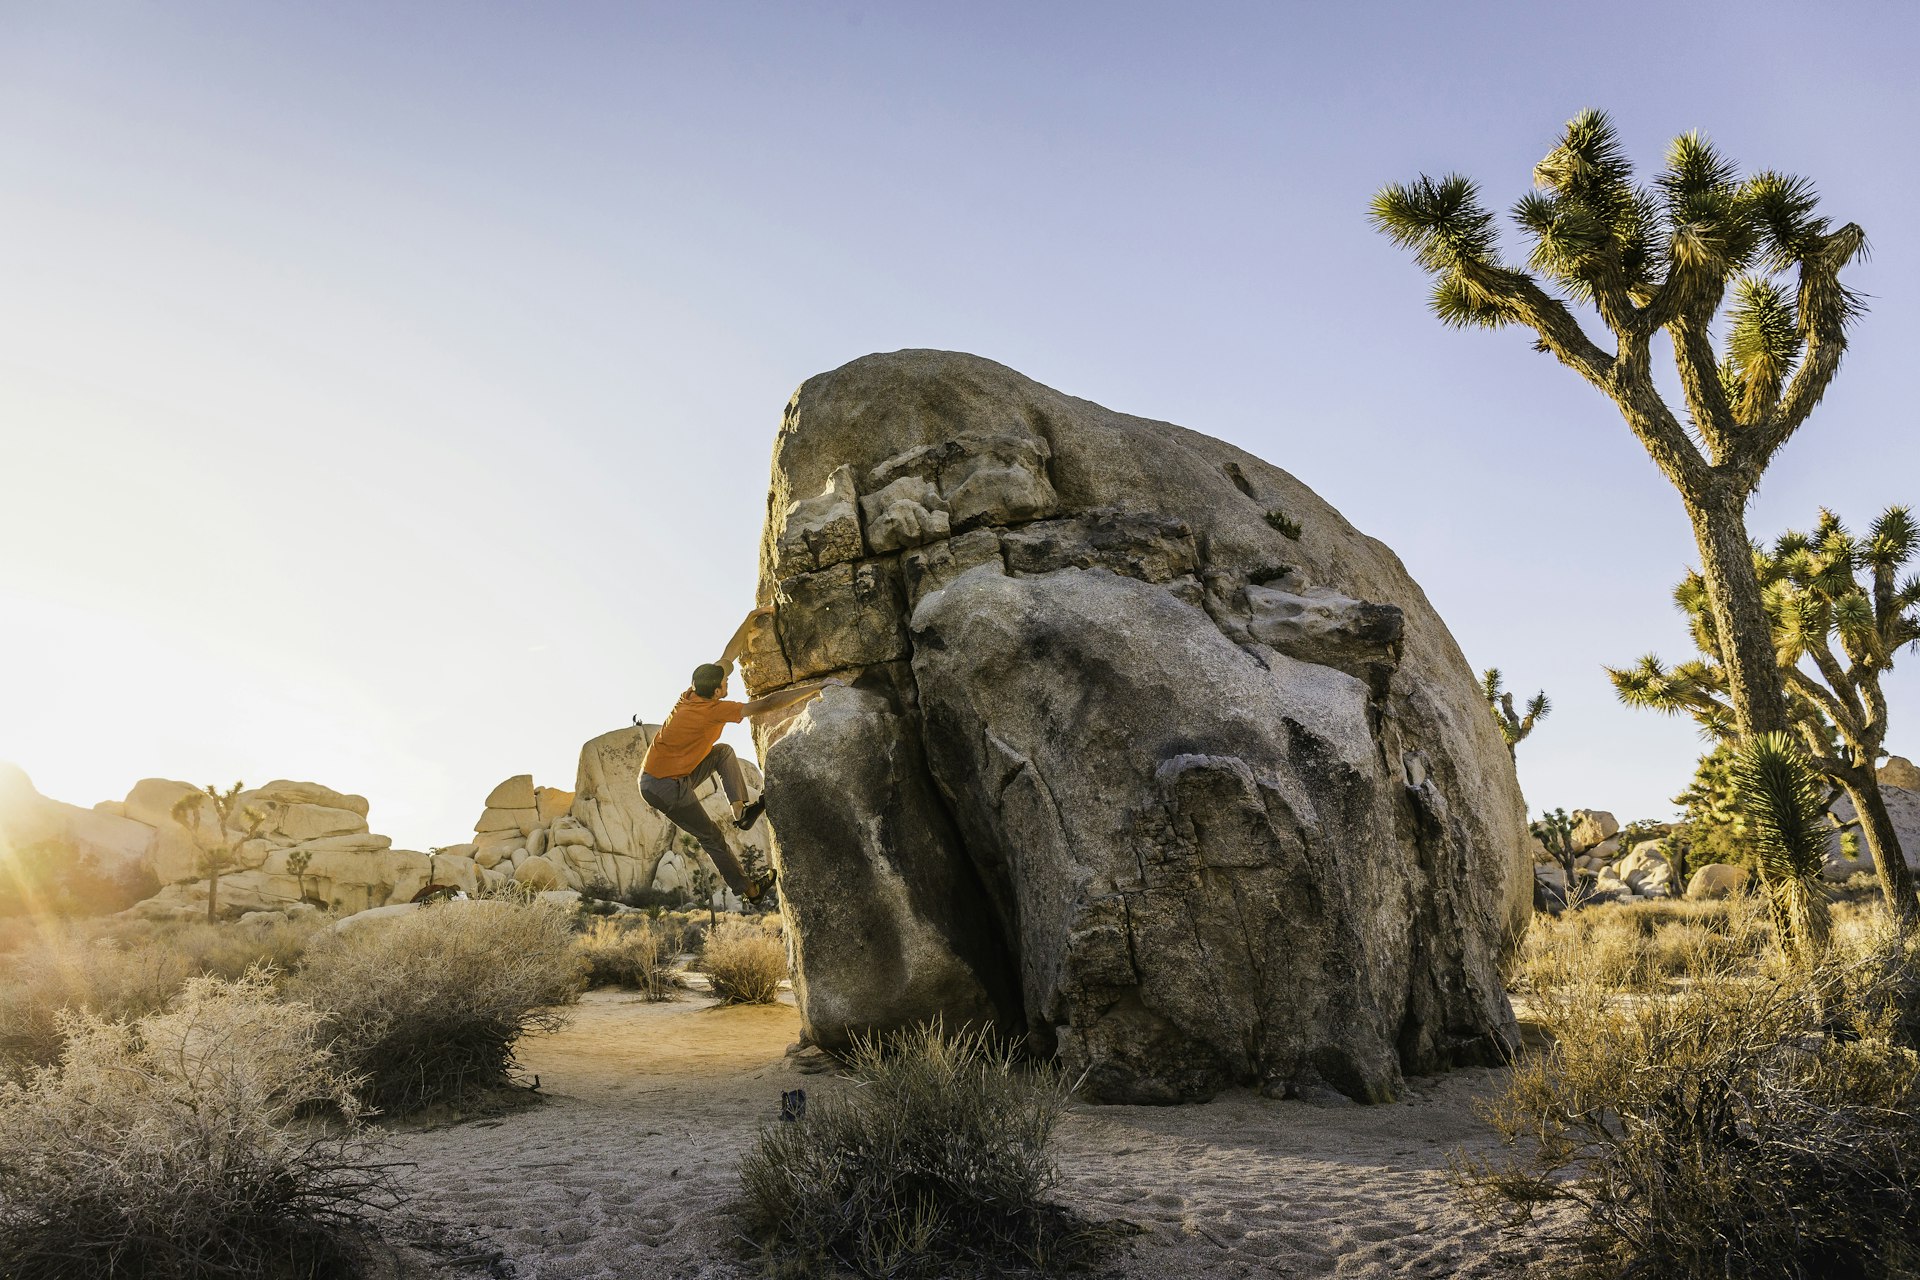 A man in olive shorts and a bright orange t-shirt climbs one of the large, rounded boulders that make up Jumbo Rocks in Joshua Tree National Park.